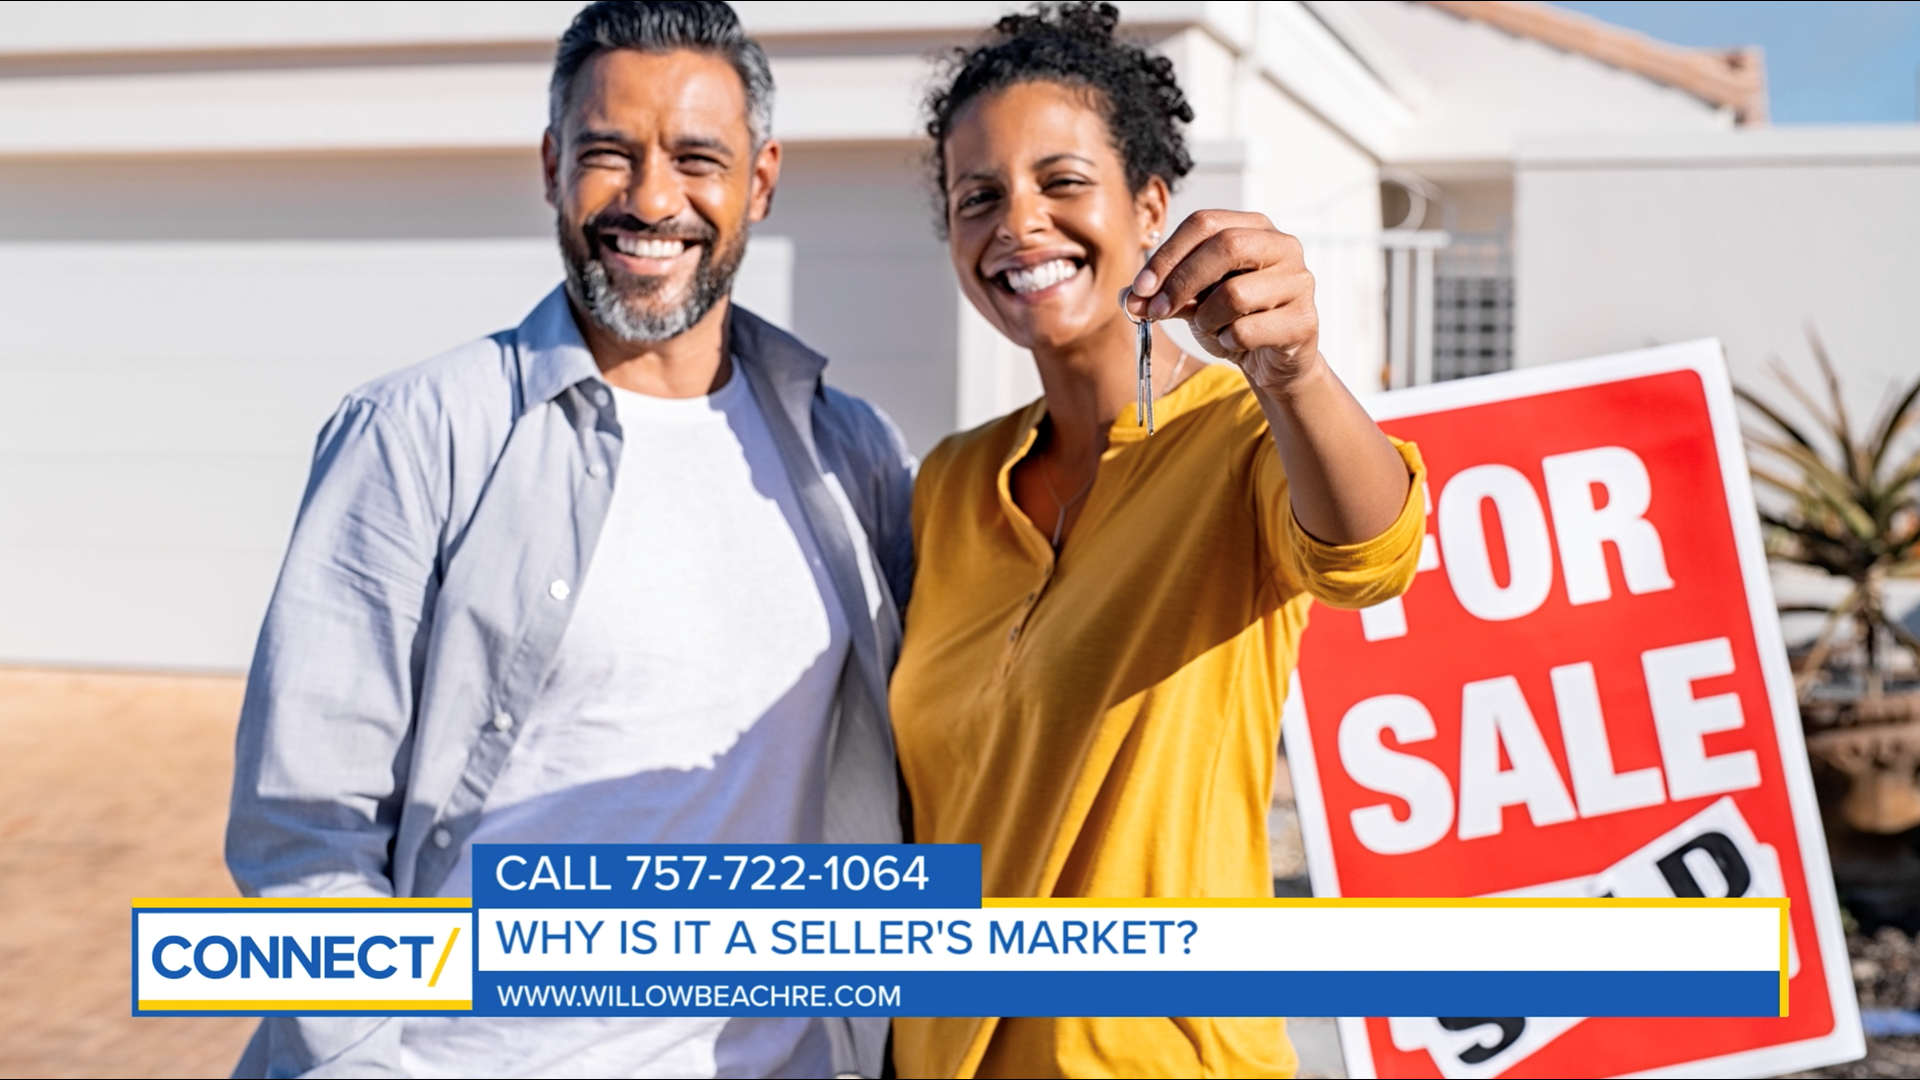 If you're considering selling your home, now is the time! But even in a seller's market, it's important to have the right team guiding you through the process.